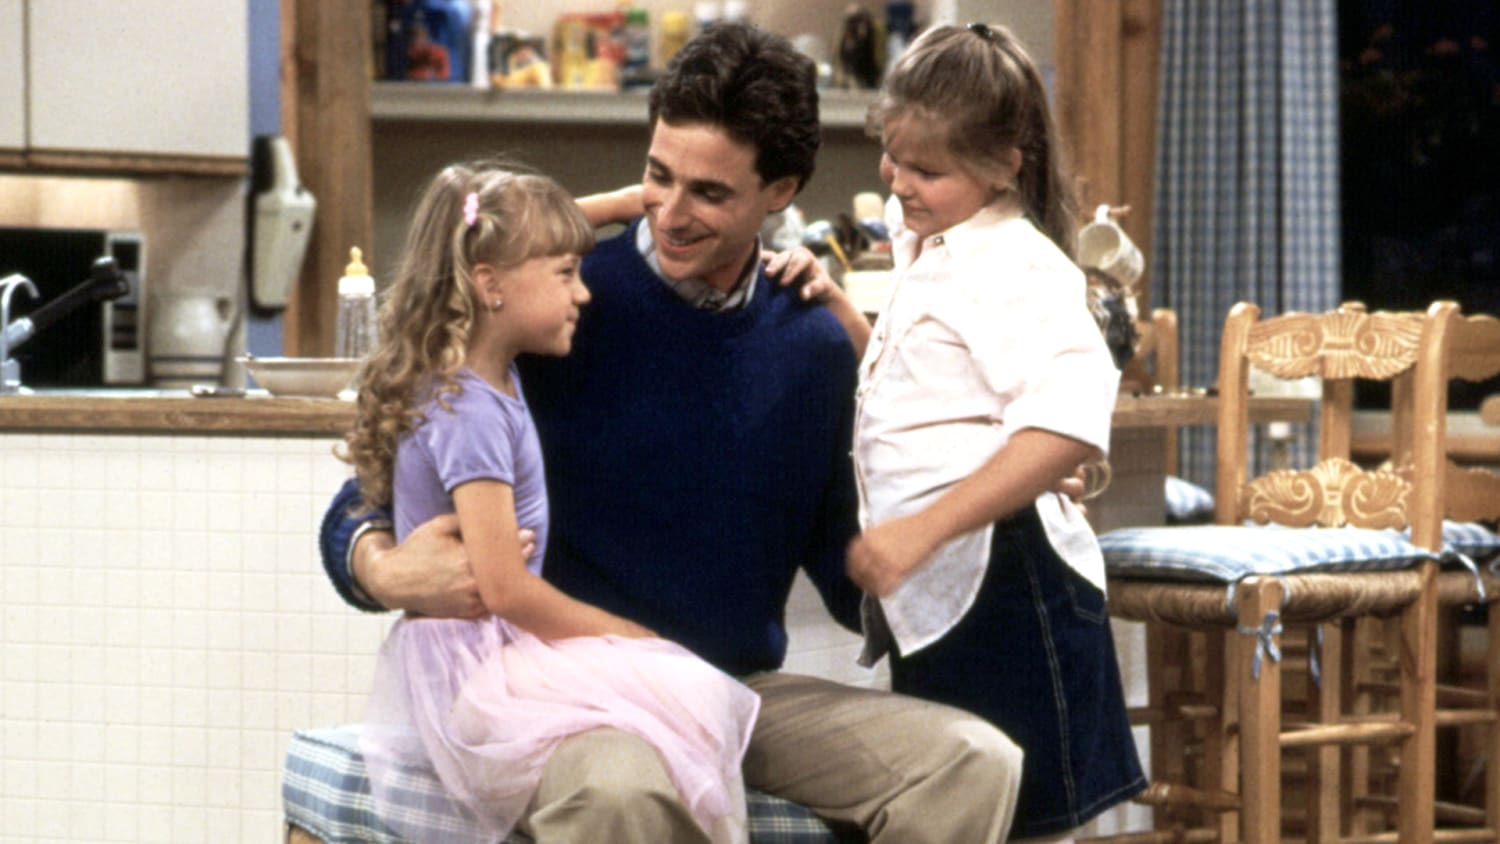 Bob Saget will join 'Fuller House' cast - TODAY.com1920 x 1080